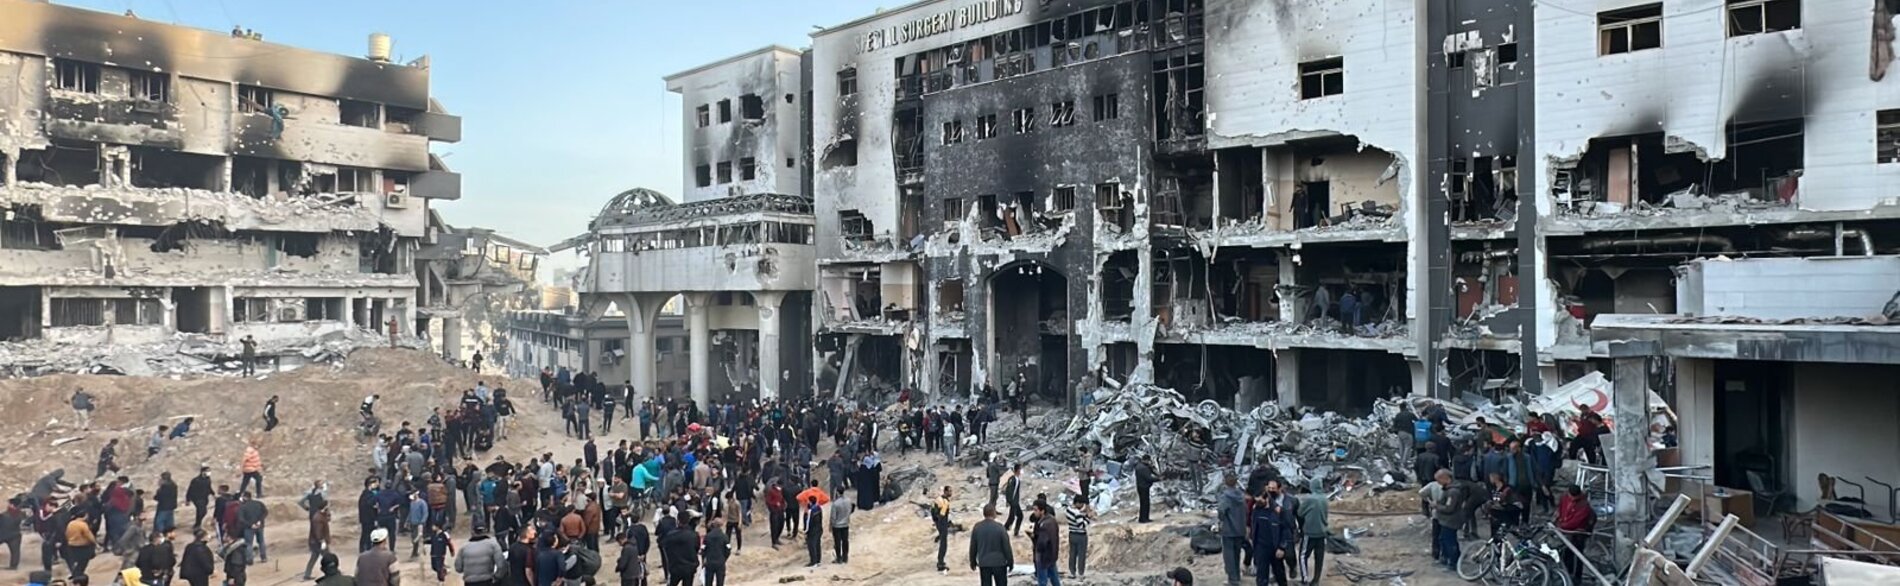 Al Shifa Hospital is now in ruins and no longer able to function as a hospital, according to the World Health Organization. Photo by WHO